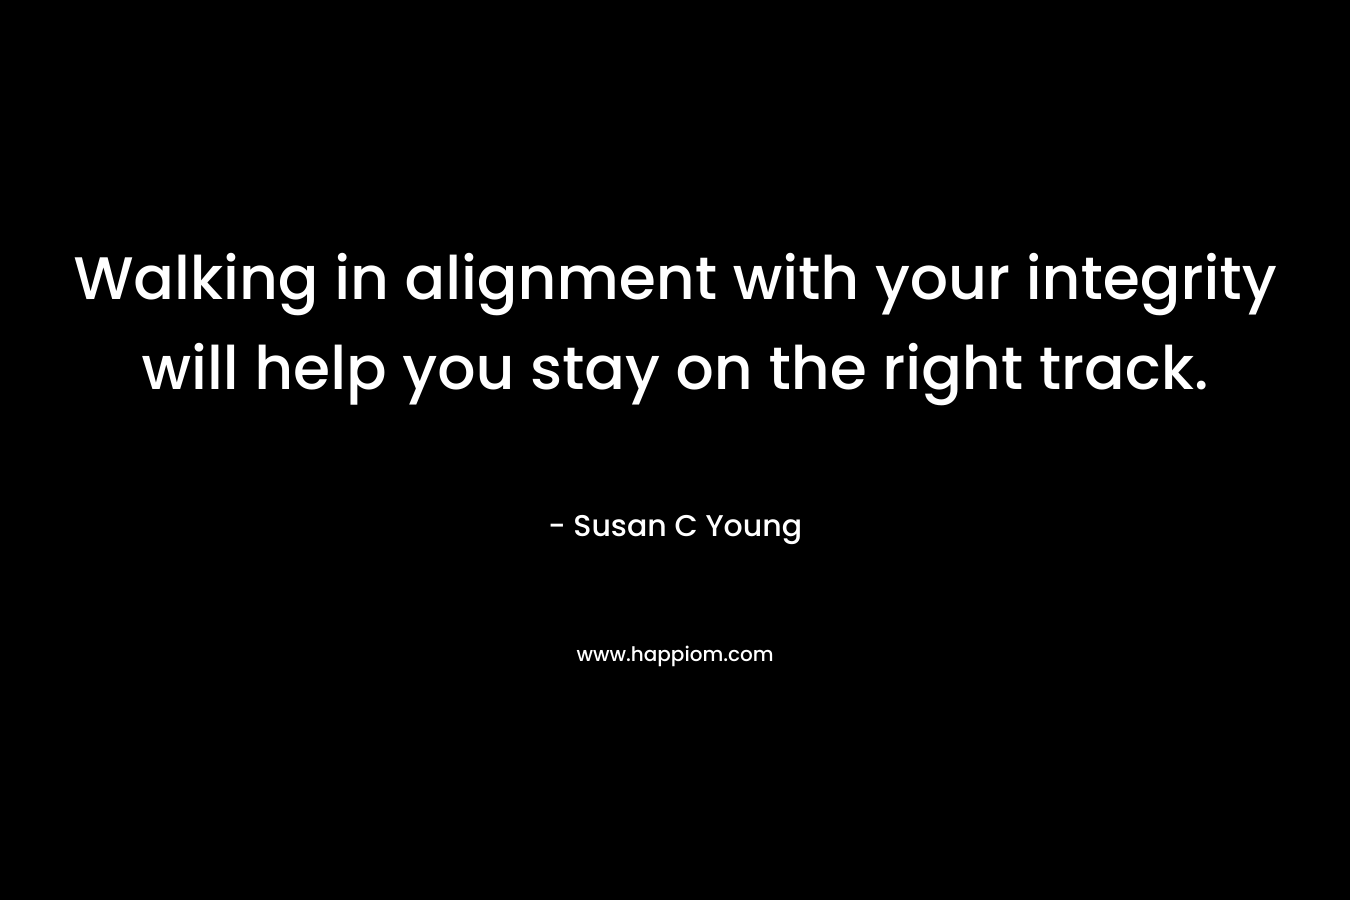 Walking in alignment with your integrity will help you stay on the right track.